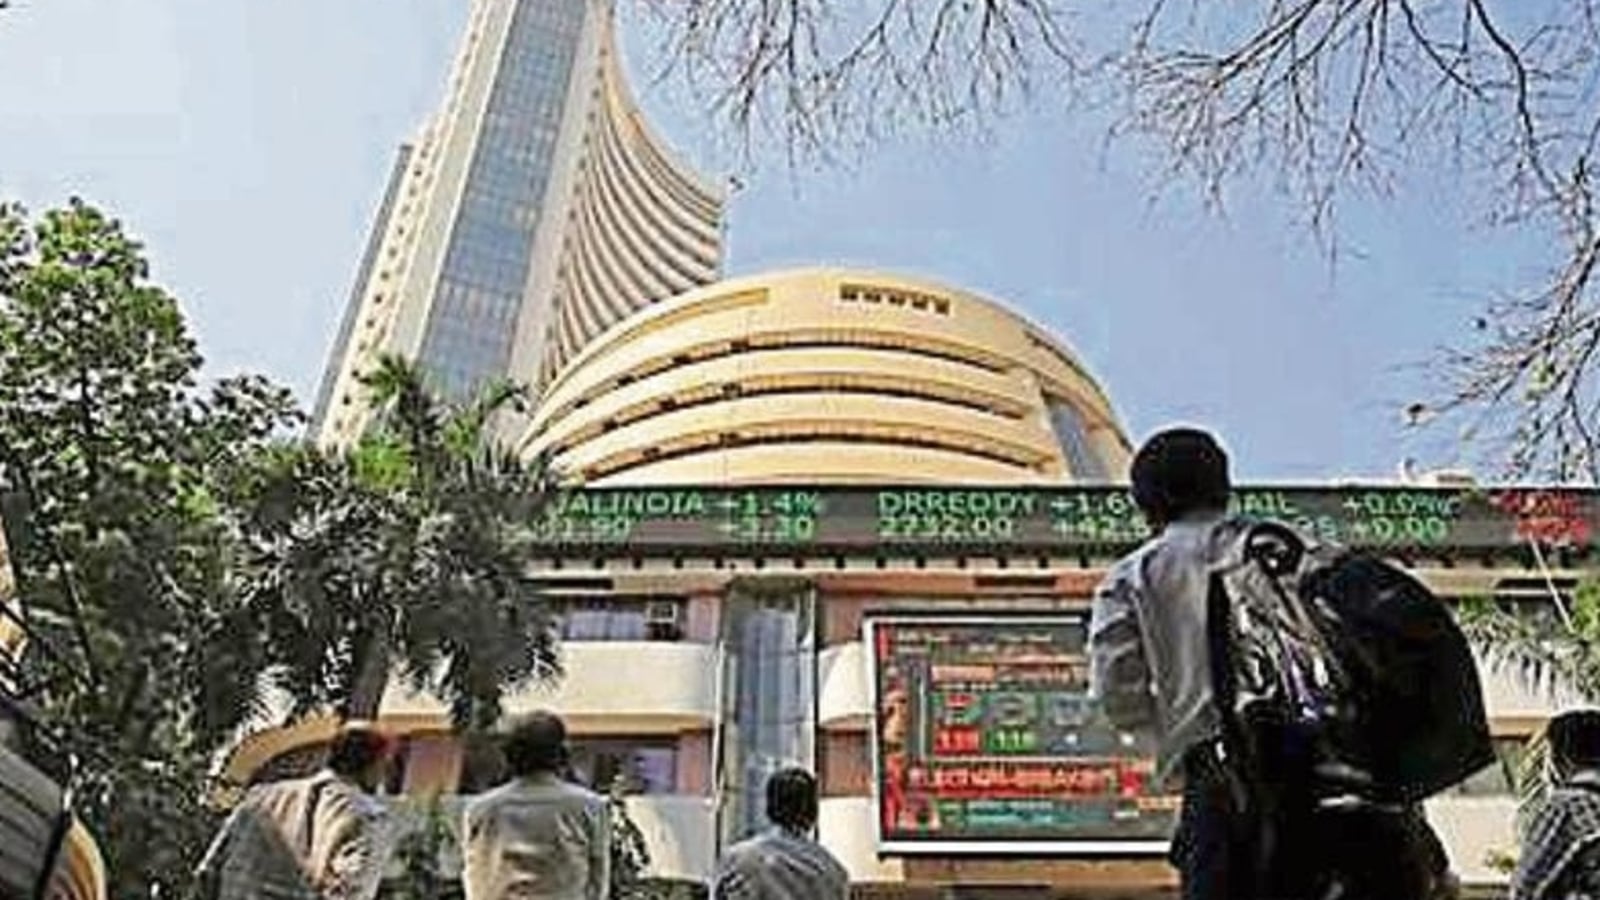 Sensex rallies 403 points to settle at 62,533, Nifty rises to 18,608